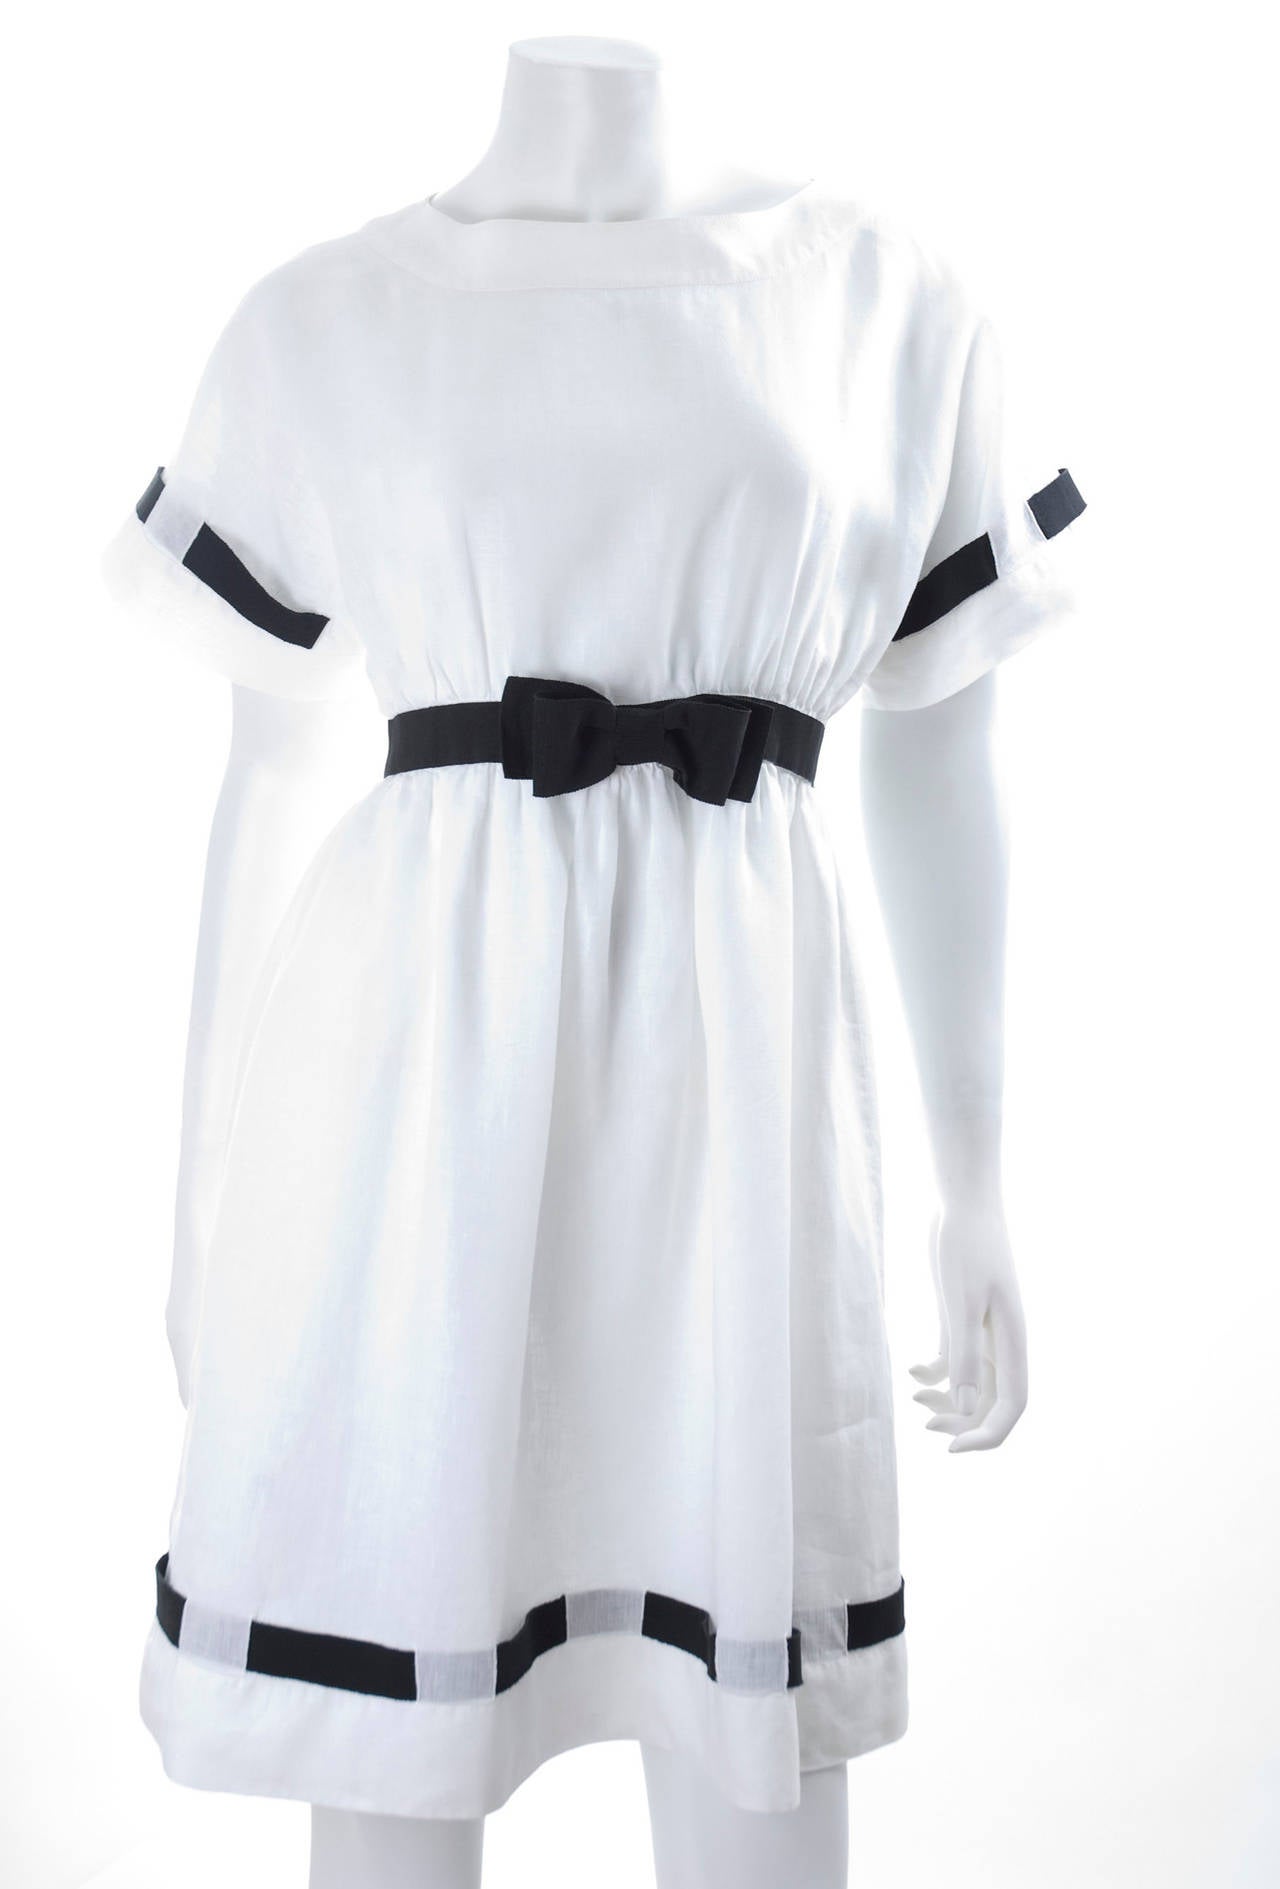 1980 Chanel Linen Dress with Black Ribbon Trim.
Button closure in the back and waist is elastic in the back.
Unlined.
Size label missing: about EU 38
Excellent condition - no flaws to mention.
Measurements:
Length 35